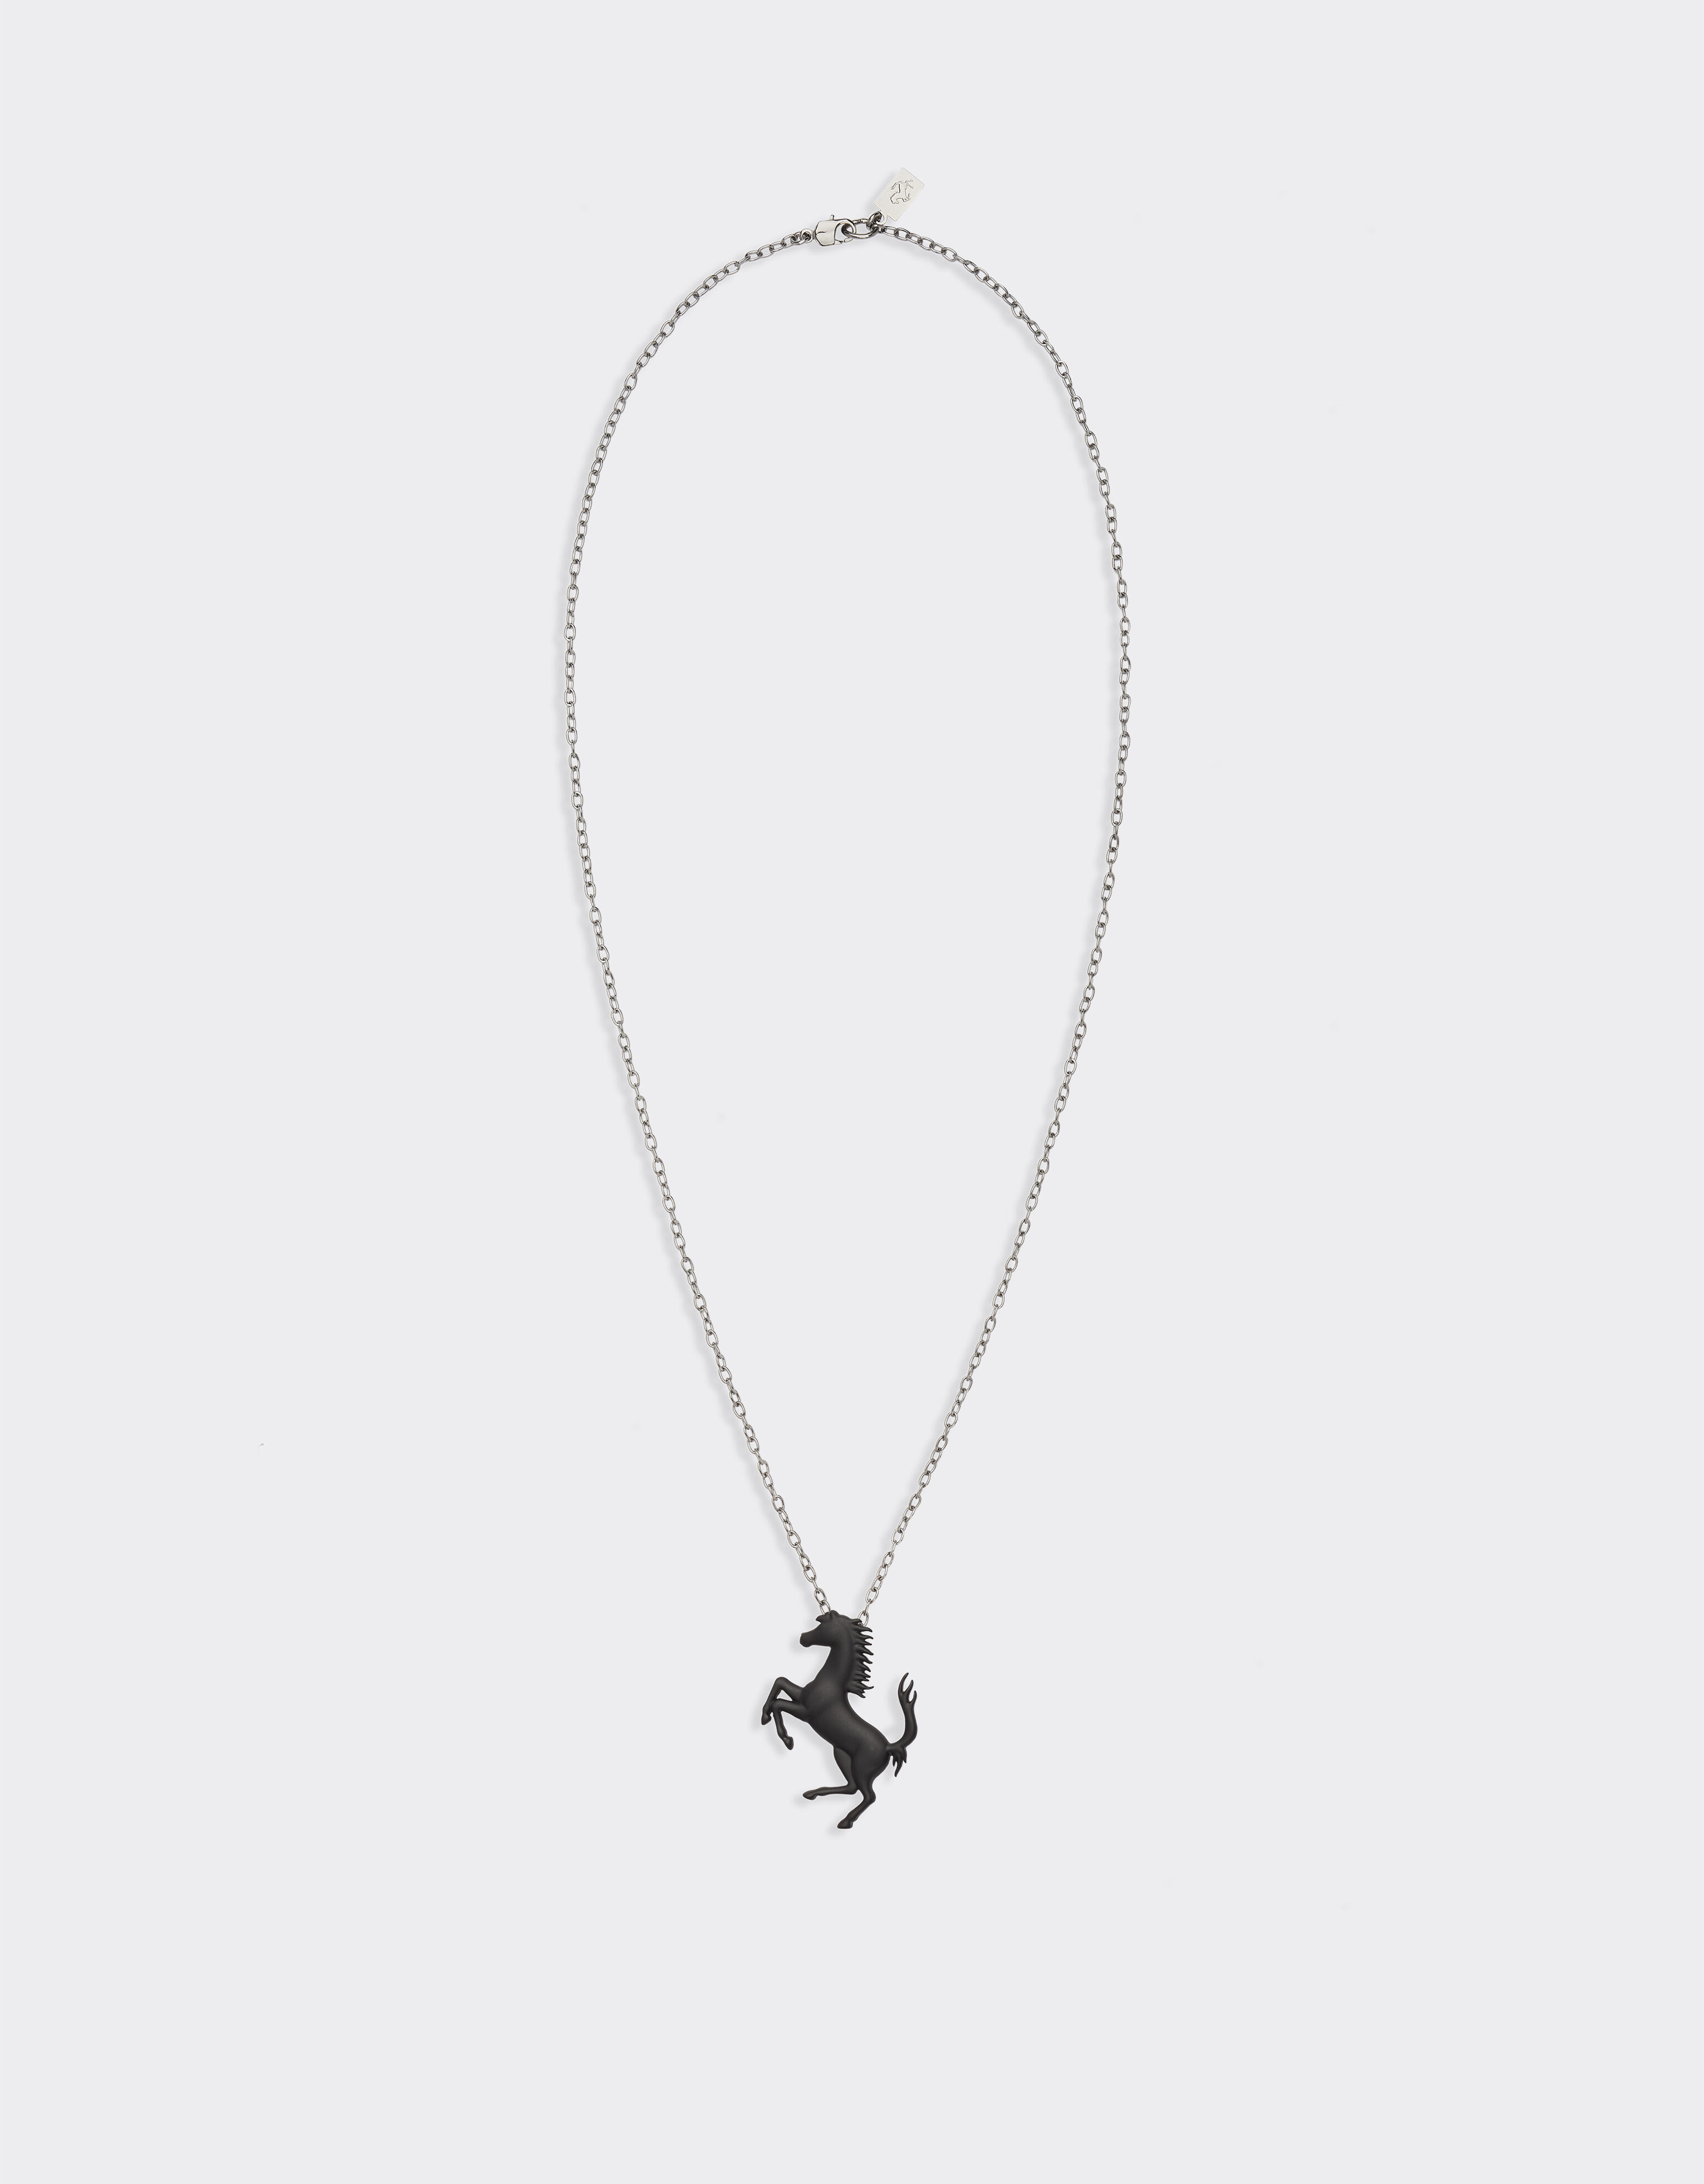 Ferrari Necklace with Prancing Horse Charcoal 20014f